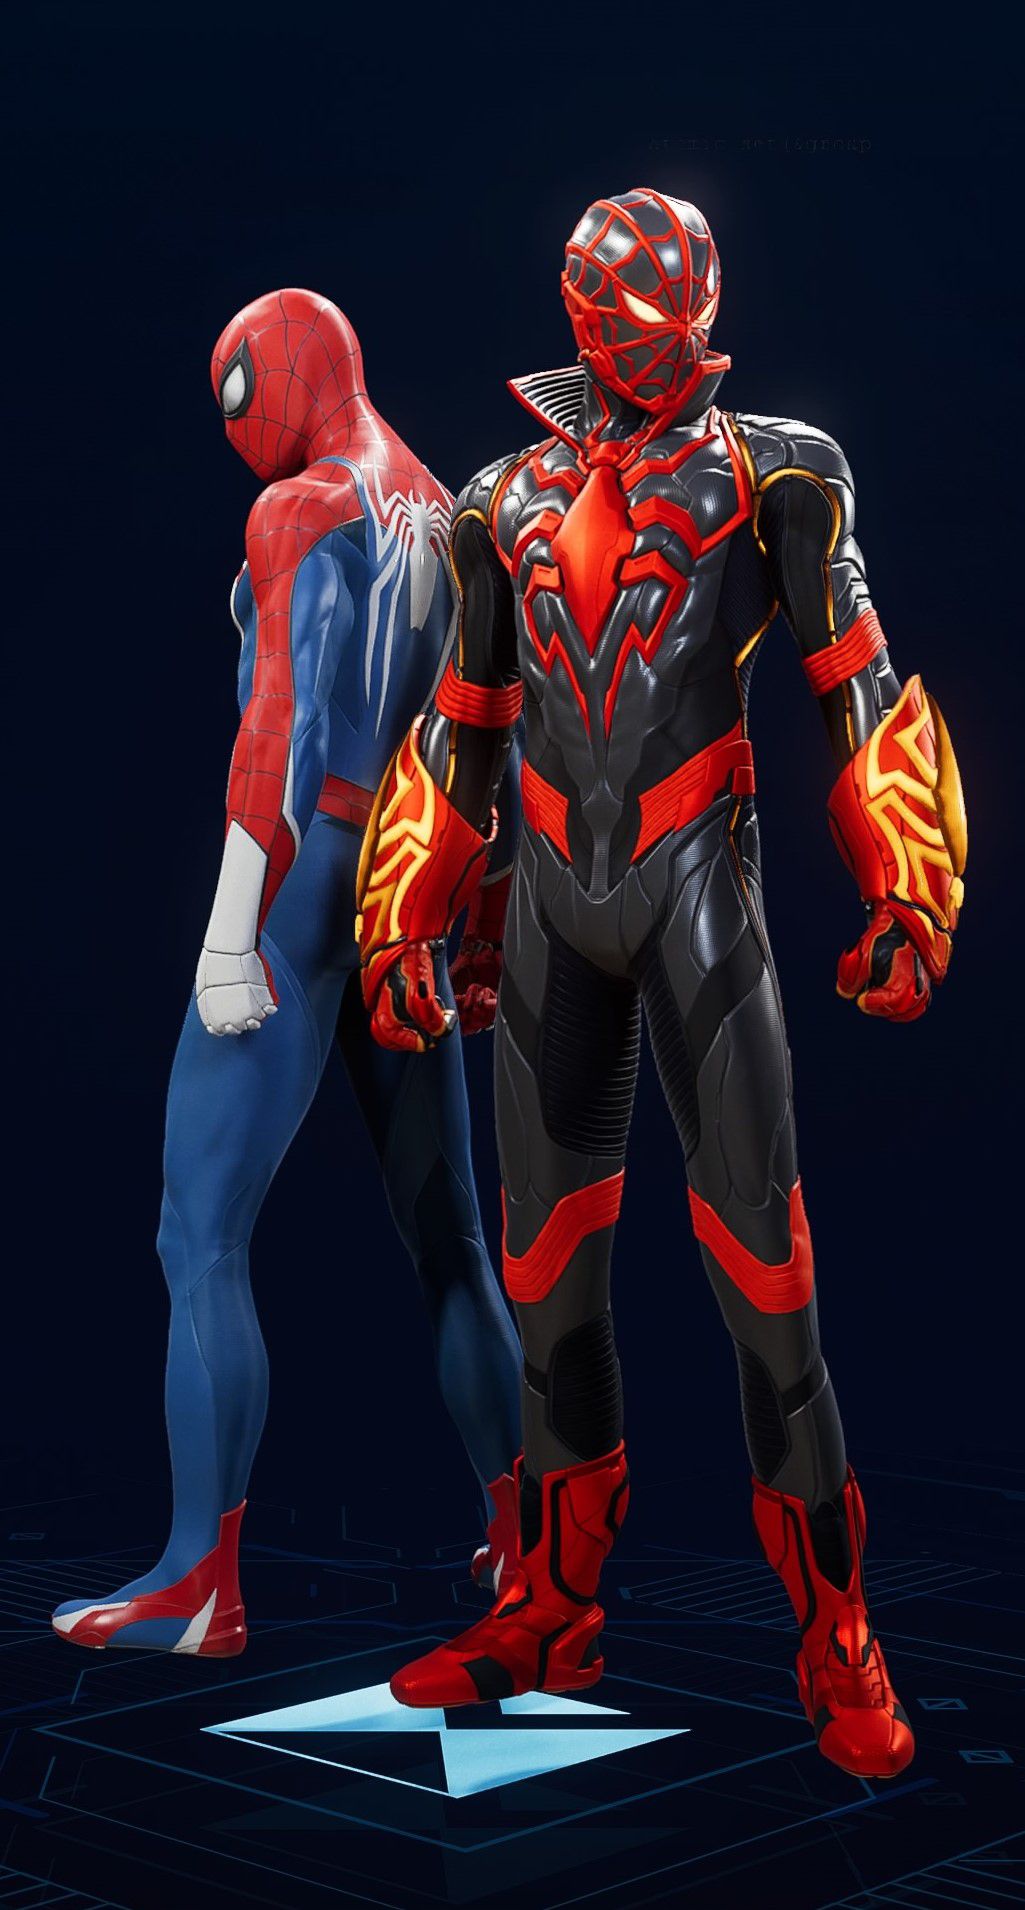 Miles Morales stands in his STRIKE Suit in the suit selection screen of Spider-Man 2.